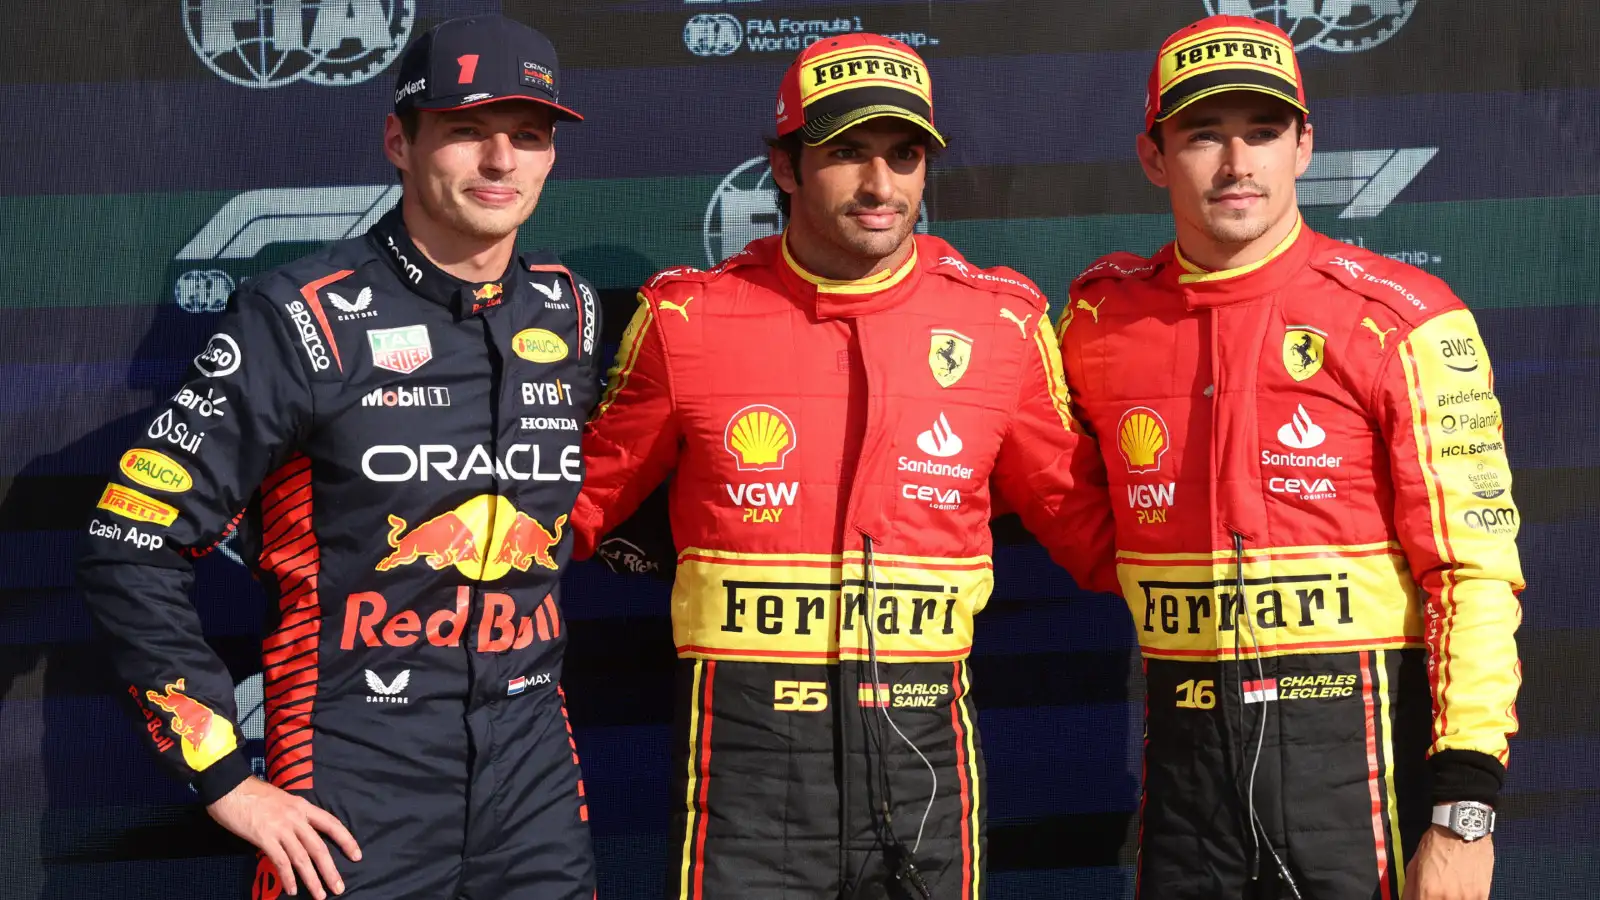 Charles Leclerc and Carlos Sainz pose with Max Verstappen after qualifying for the 2023 Italian Grand Prix.